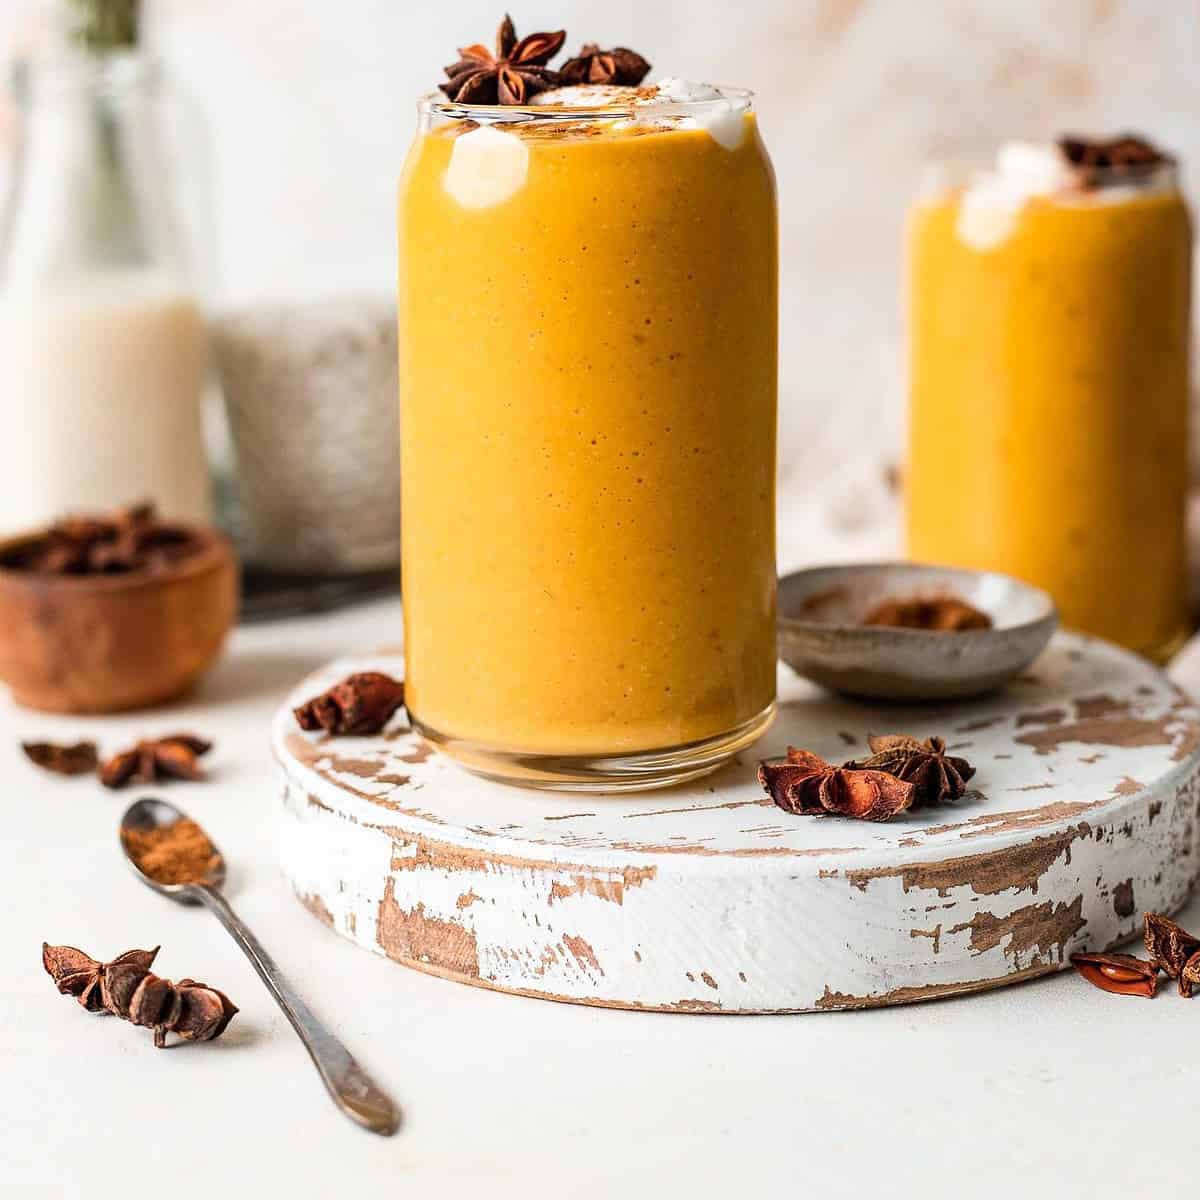  Brighten up your day with this vibrant orange smoothie!